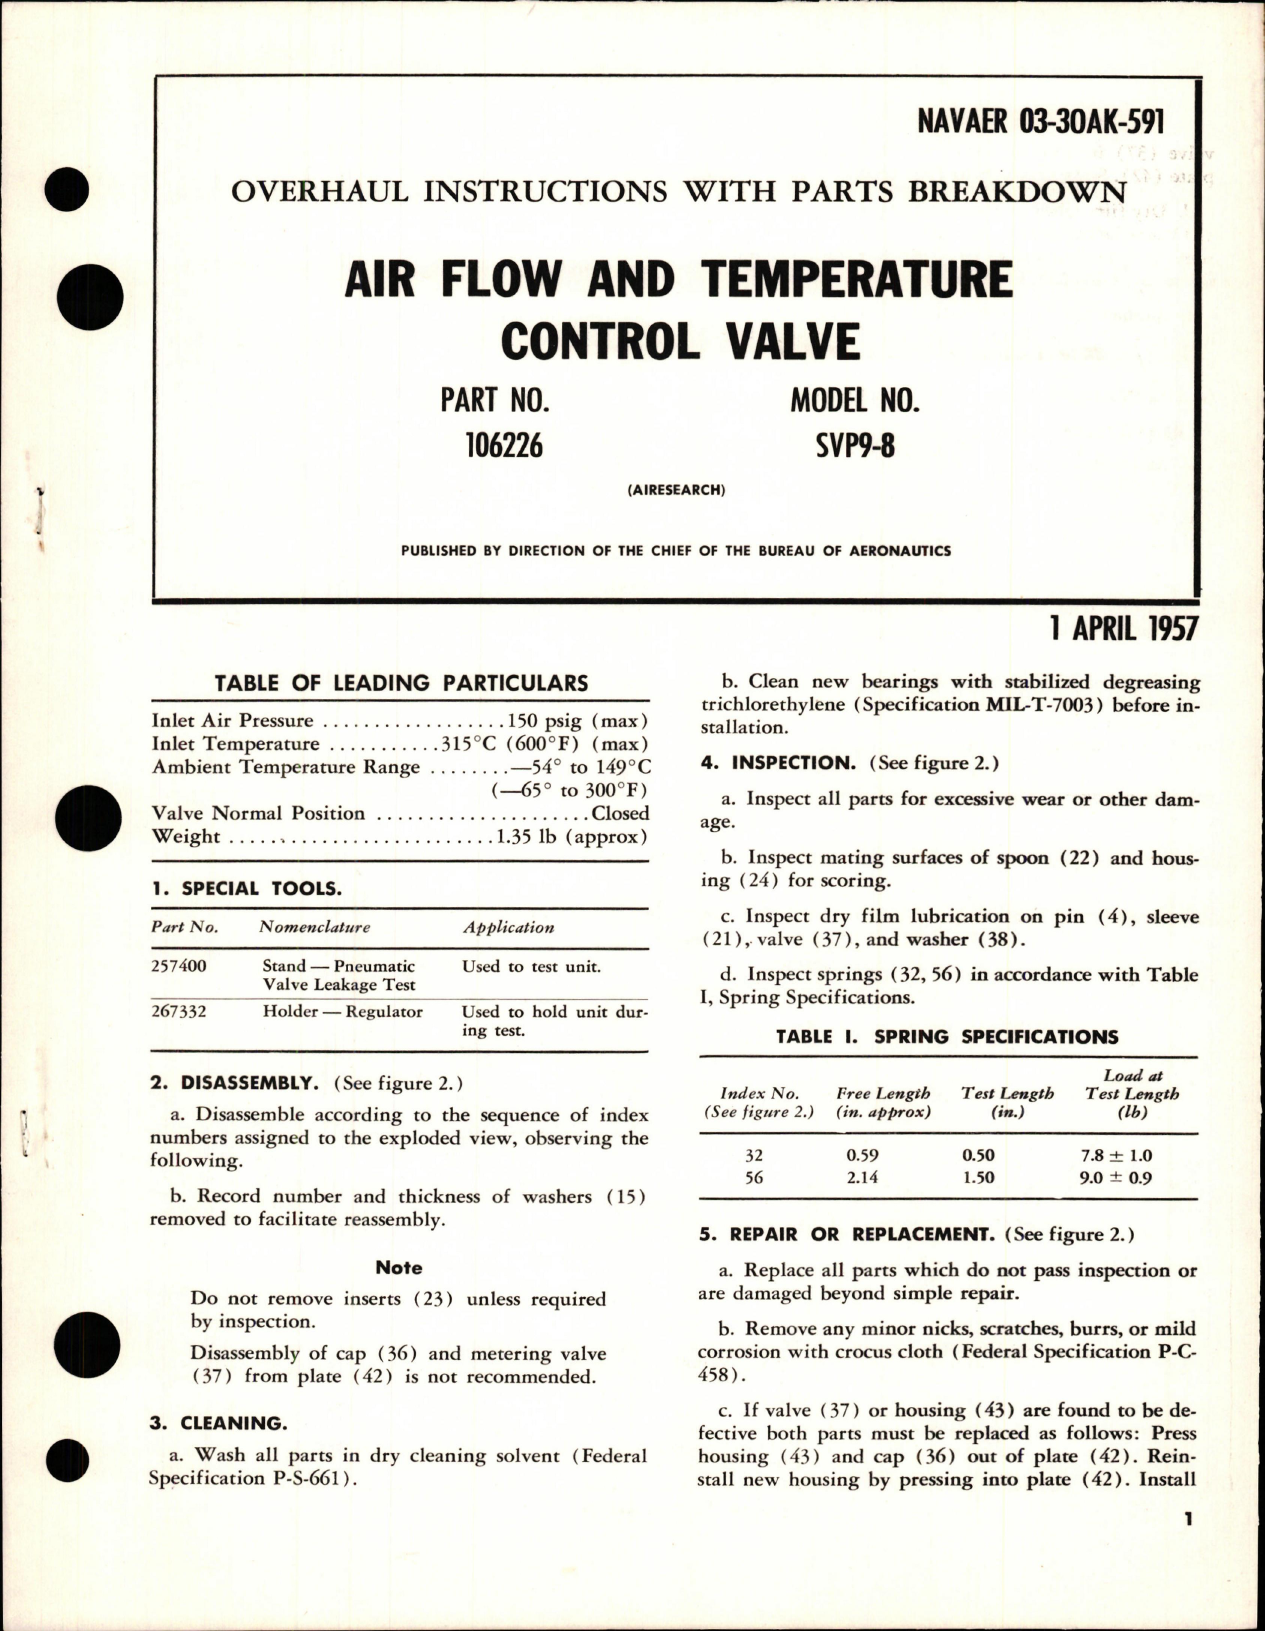 Sample page 1 from AirCorps Library document: Overhaul Instructions with Parts Breakdown for Air Flow and Temperature Control Valve - Part 106226 - Model SVP9-8